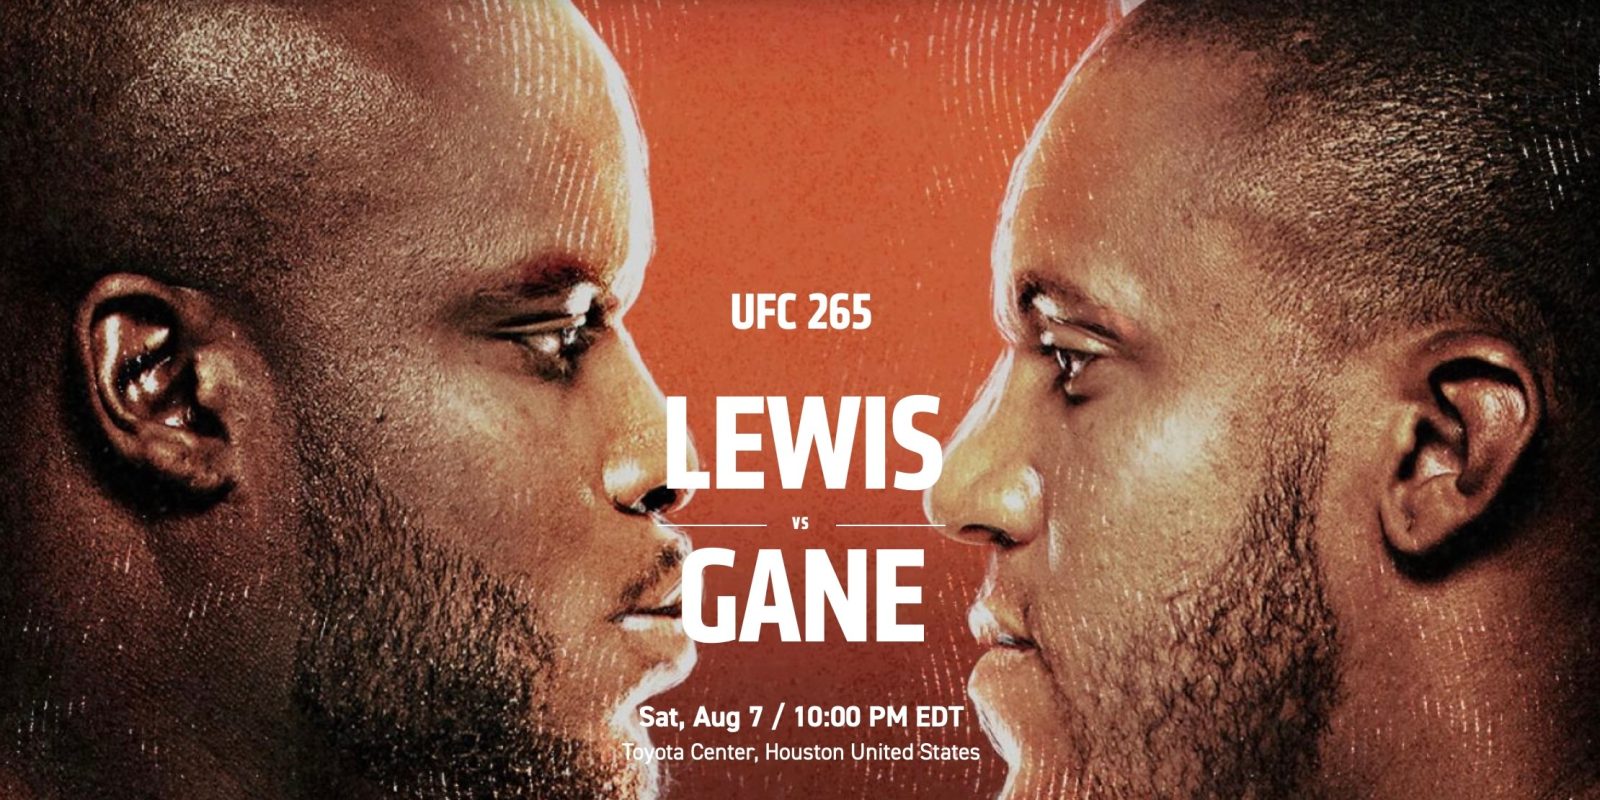 How to watch Lewis vs Gane UFC 265